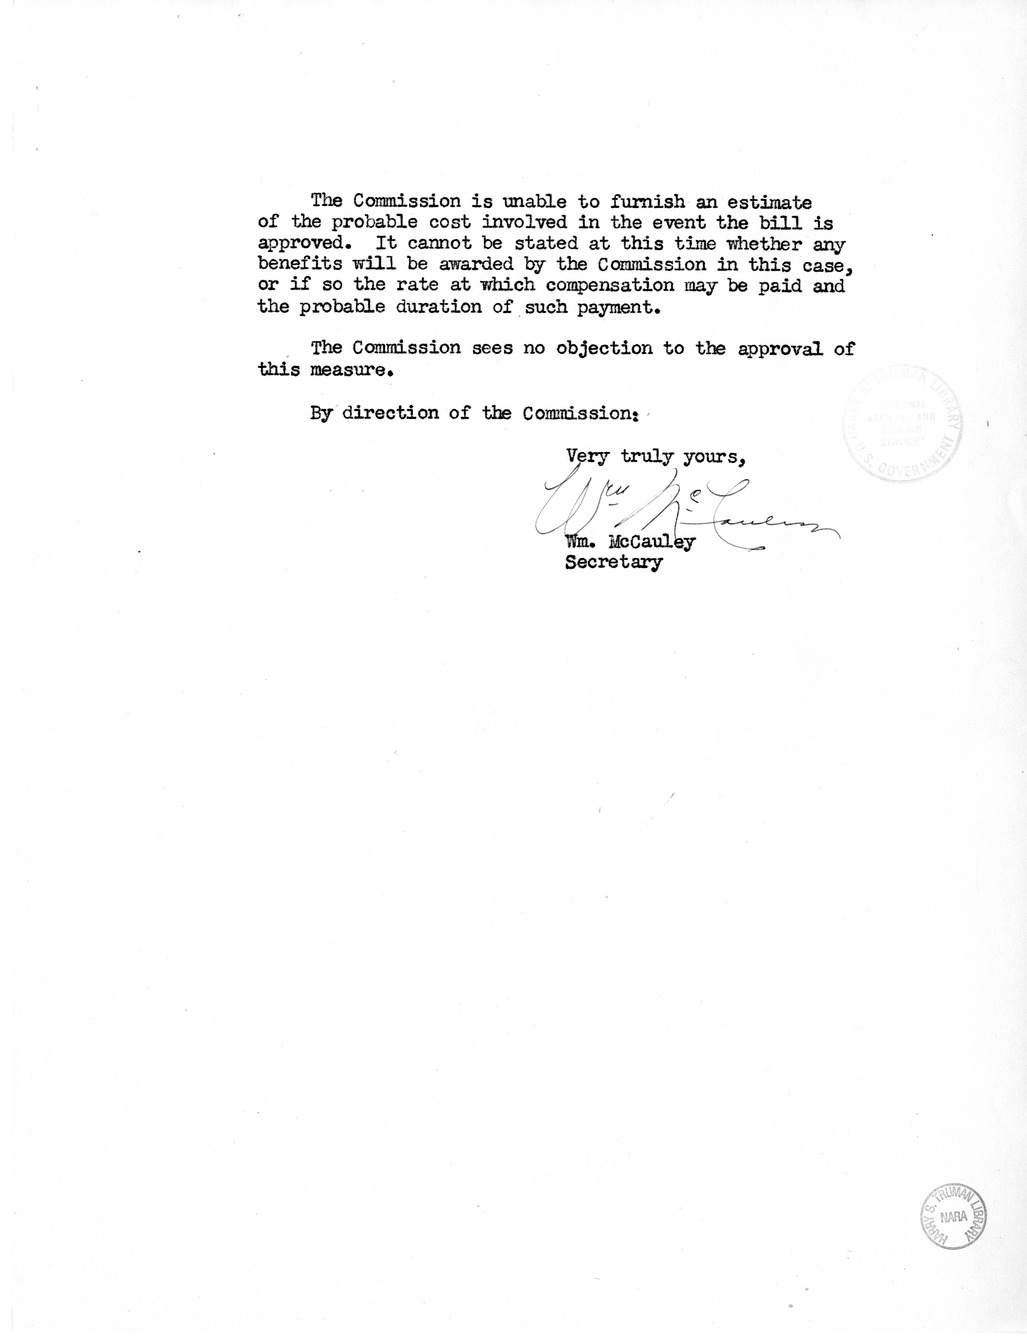 Memorandum from Harold D. Smith to M. C. Latta, H. R. 949, for the Relief of Mrs. Mildred Ring, with Attachments